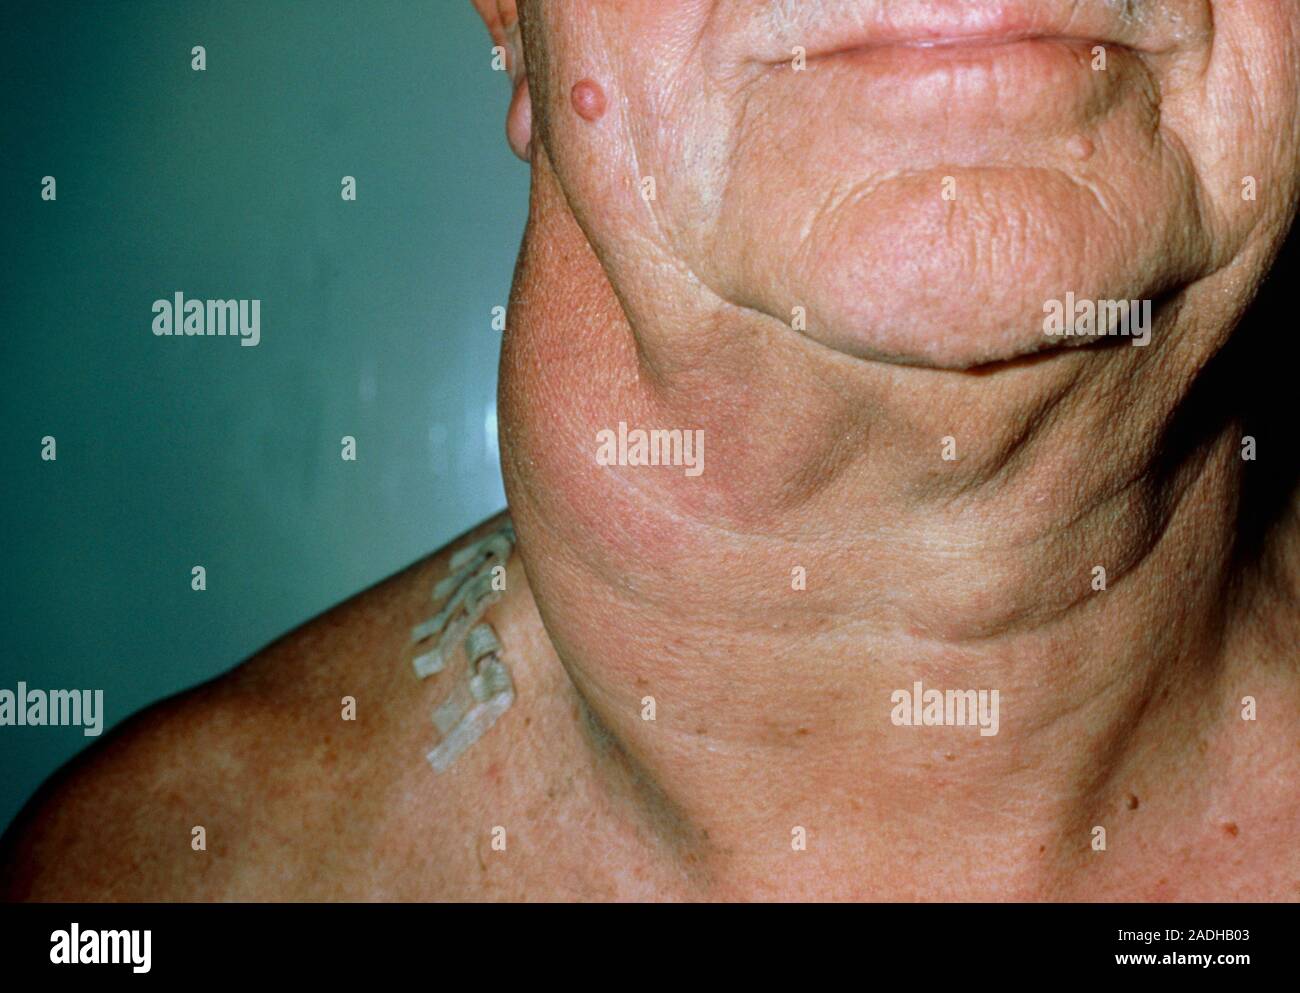 Lymphoma Clinical Photo Of The Neck Of A Patient With A Non Hodgkins